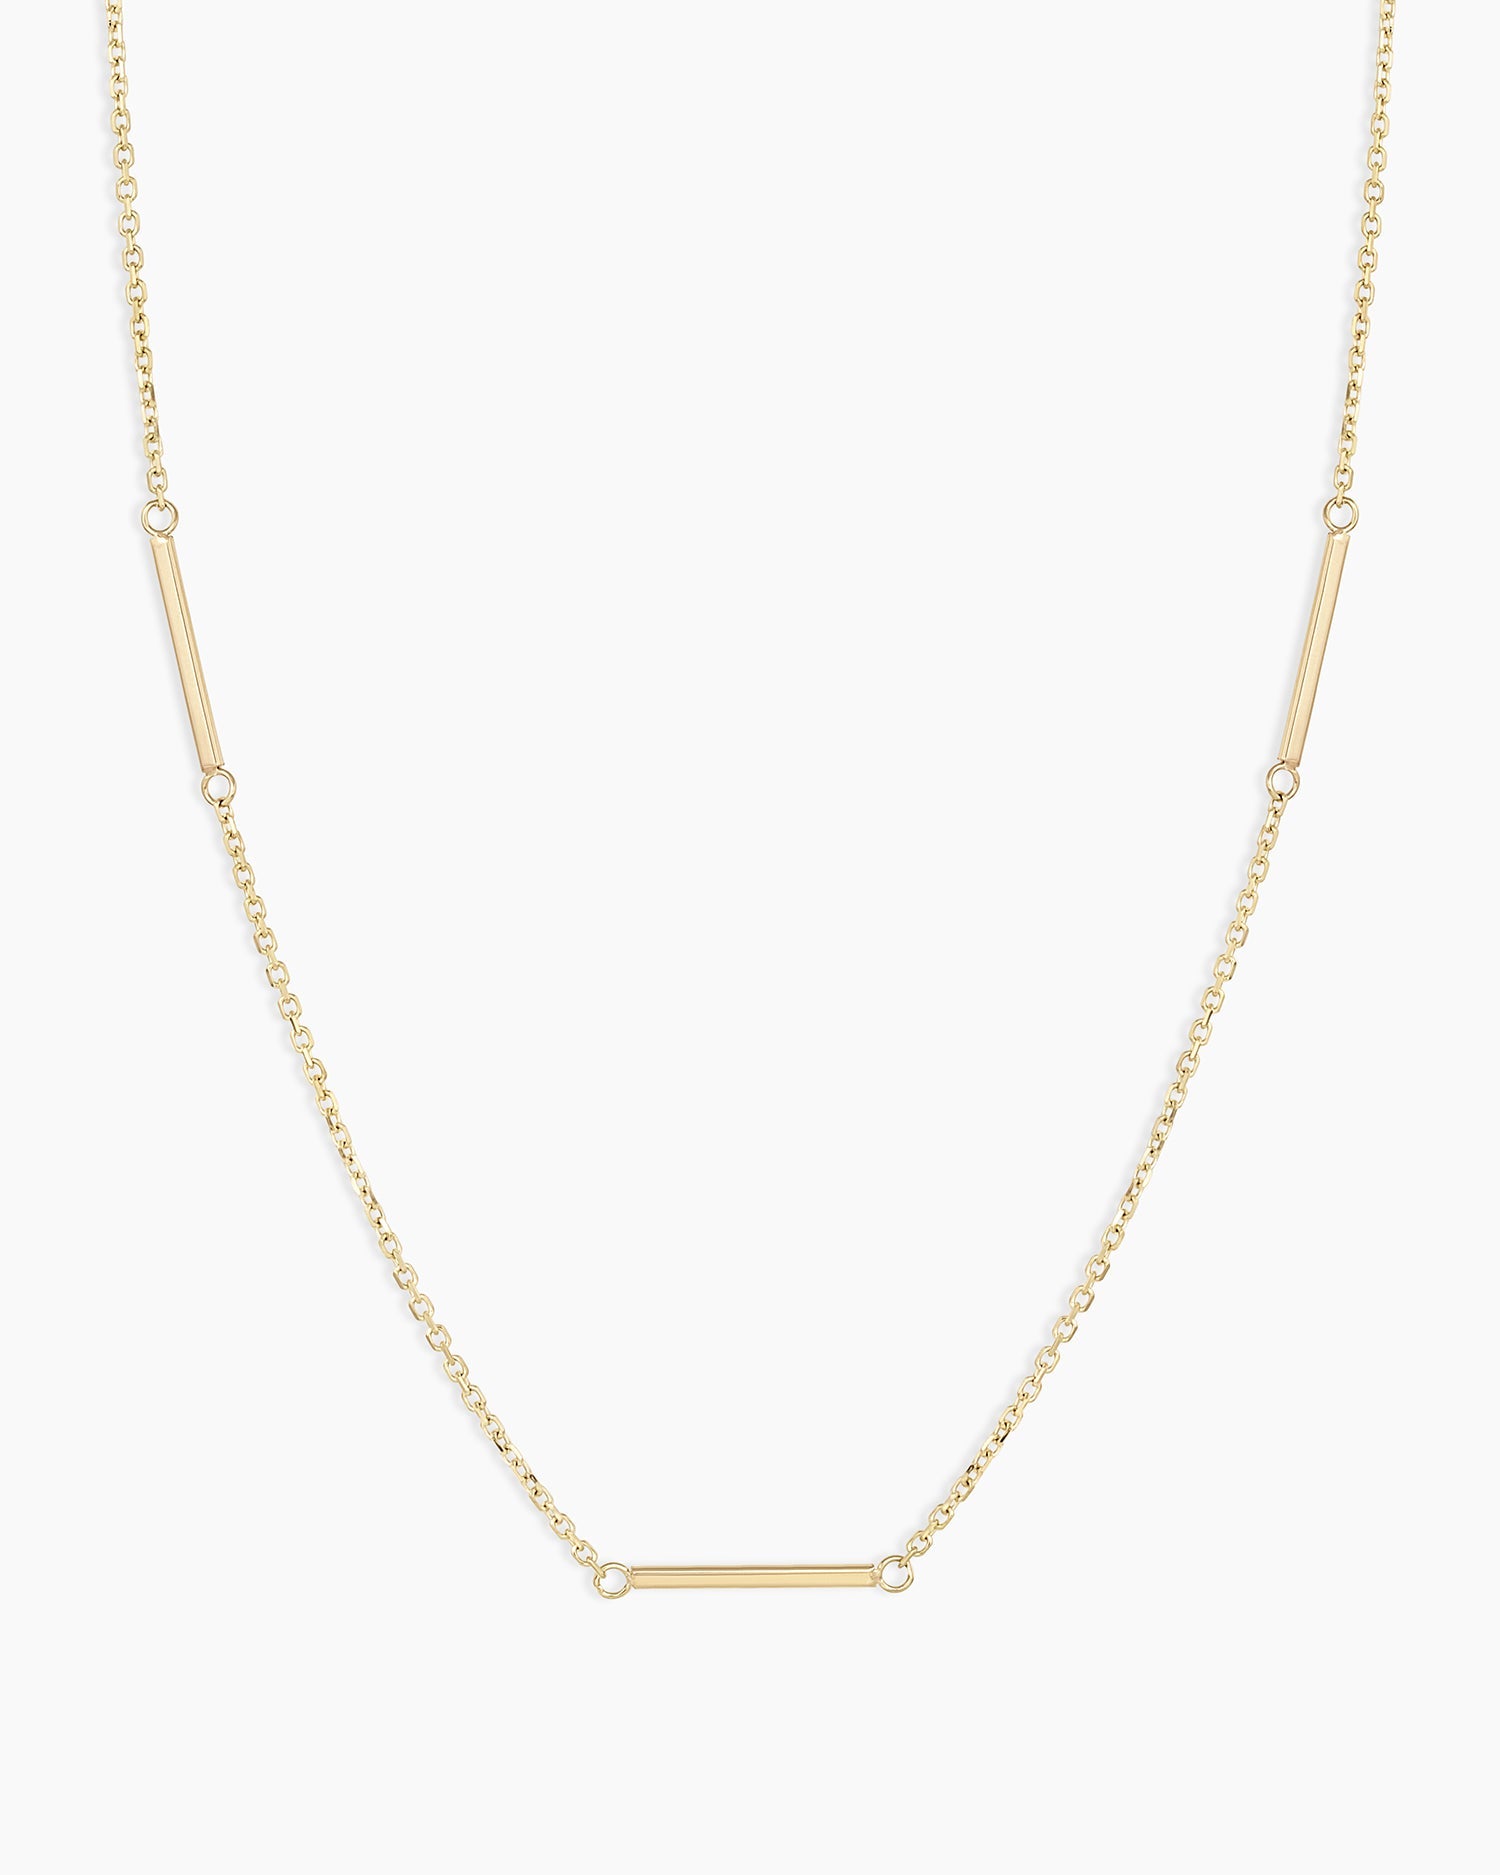 3.0mm Rope Chain Necklace in 14K Gold - 20